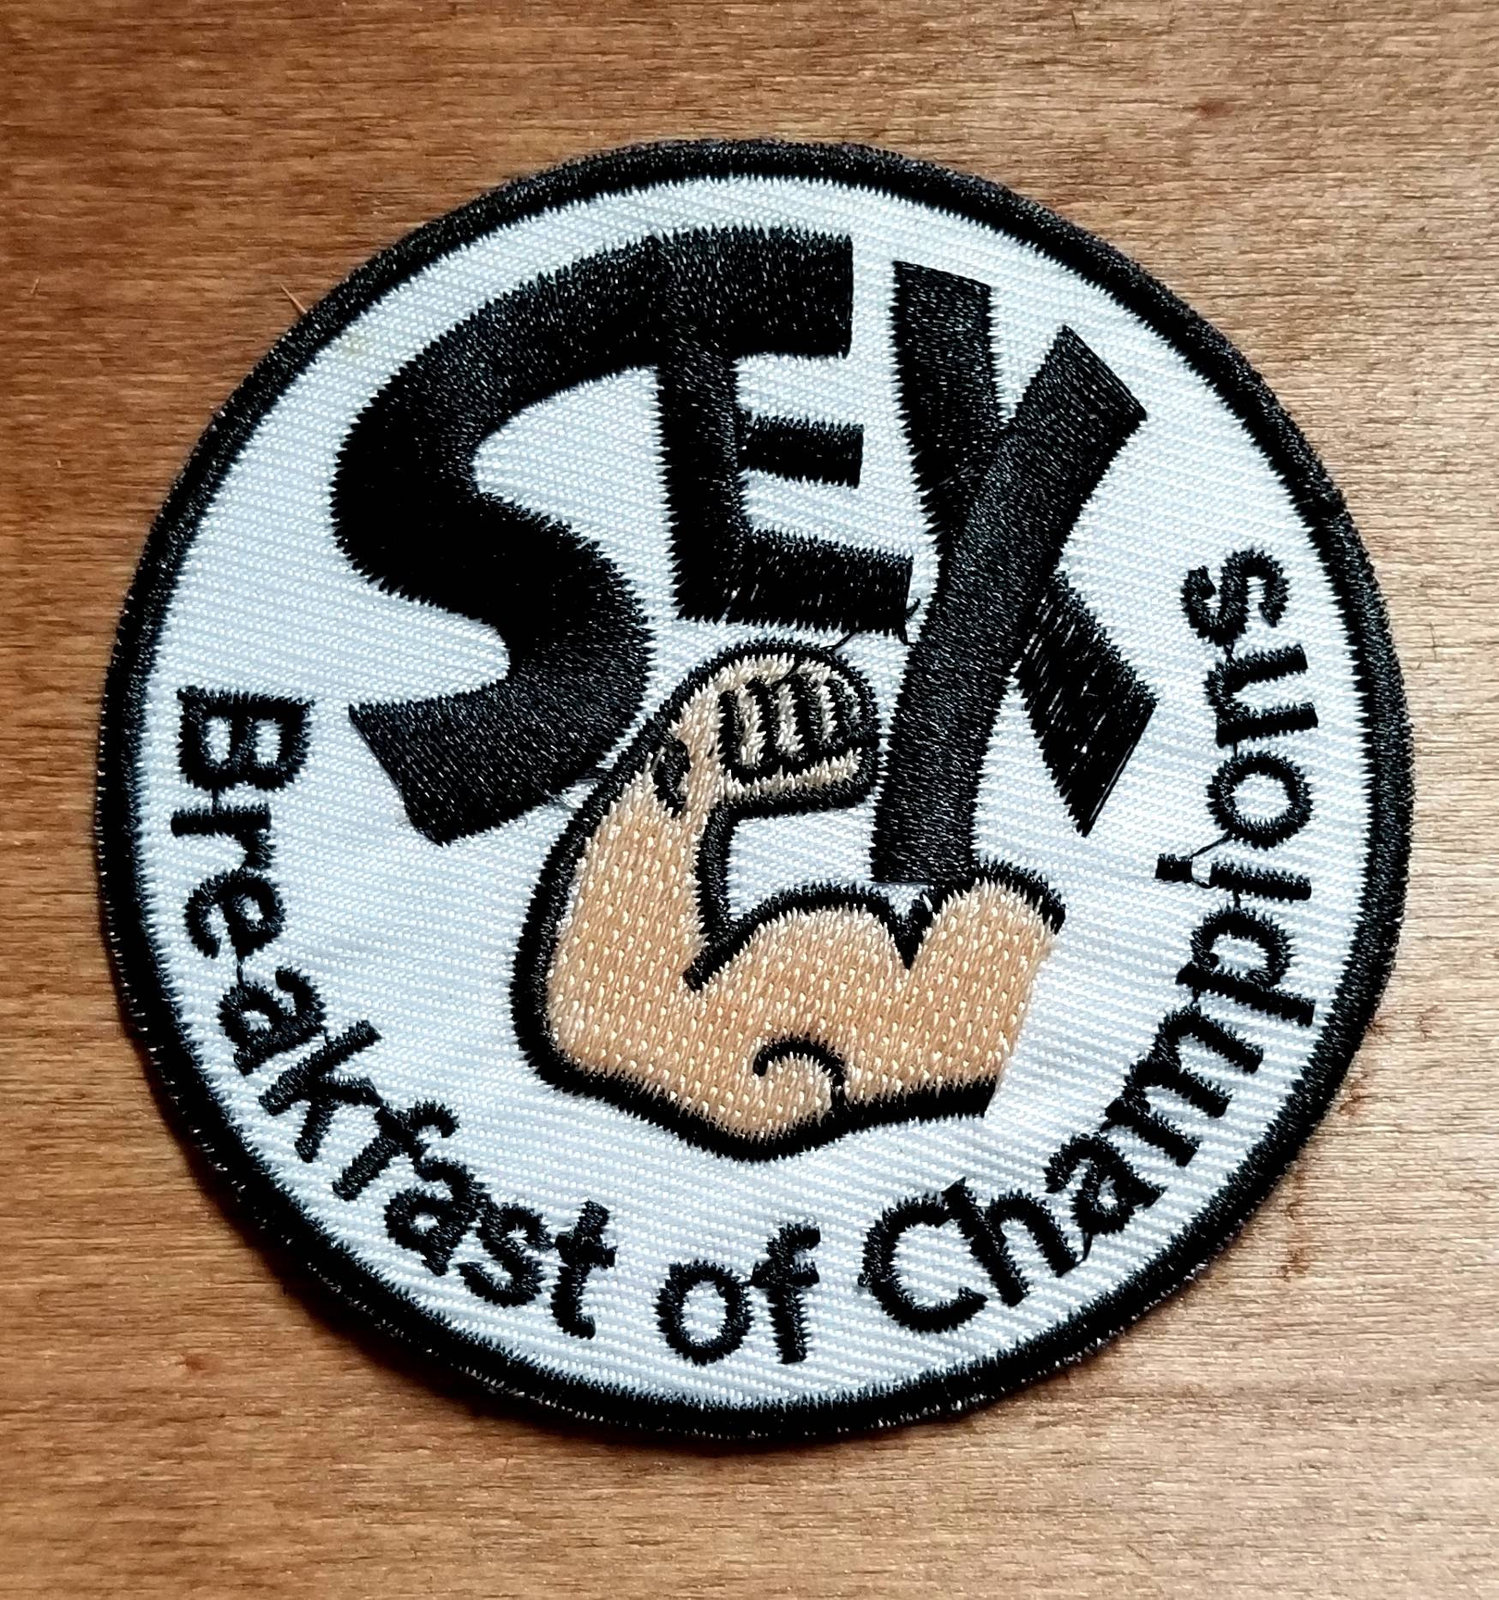 Vintage Sex Breakfast Of Champions Embroidered Patch Patches 4306